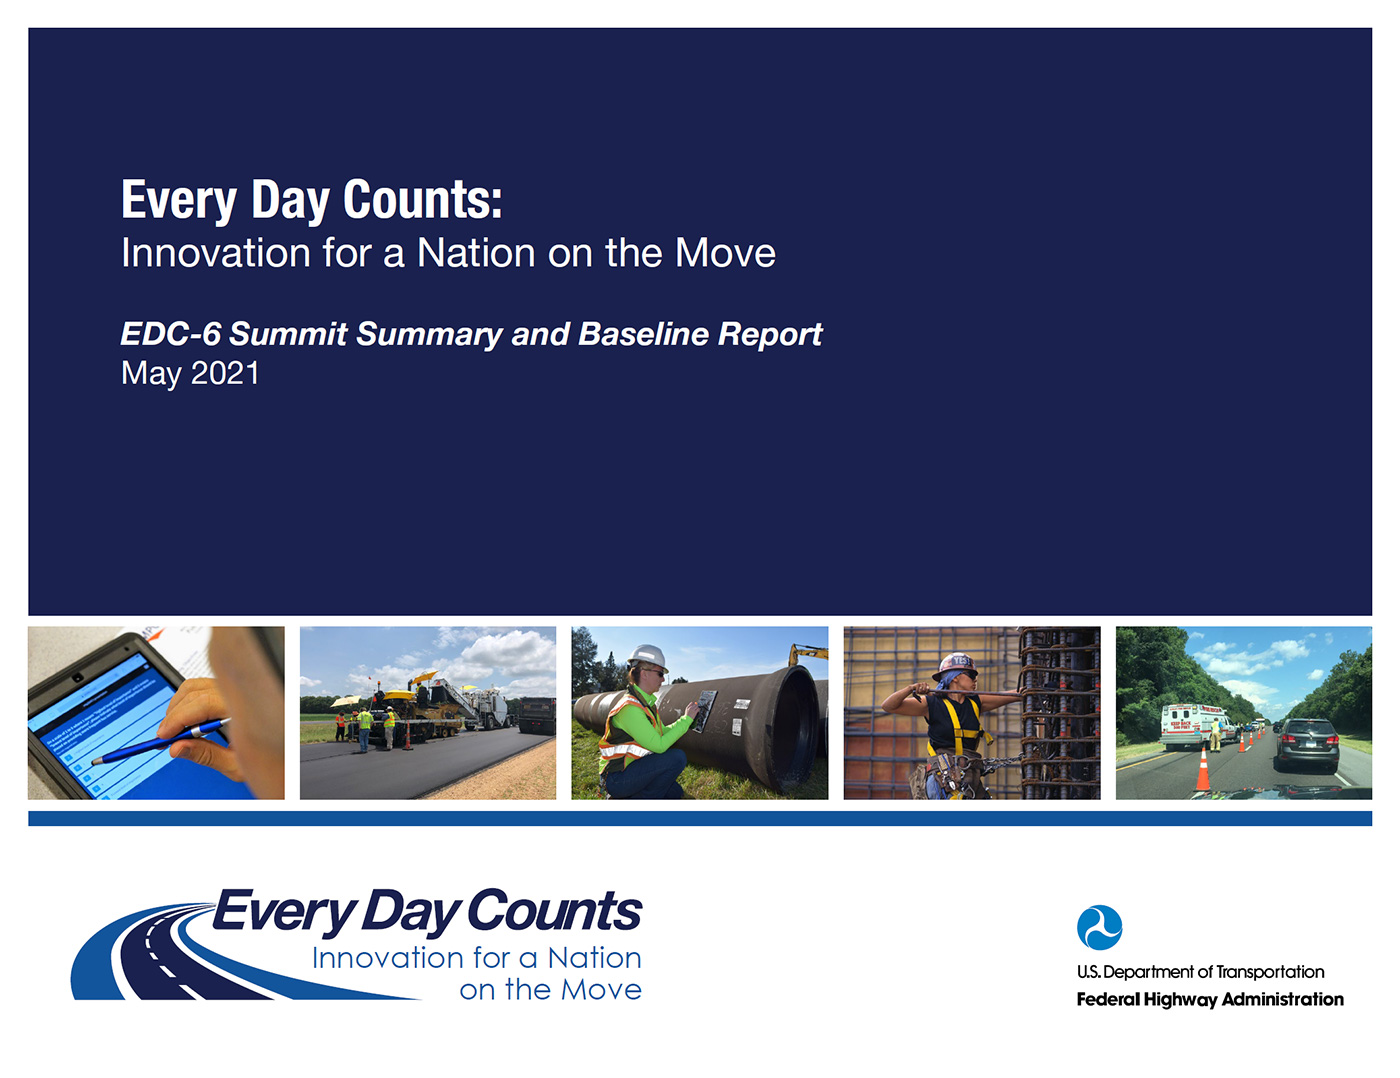 Cover of the EDC-6 Summit Summary and Baseline Report